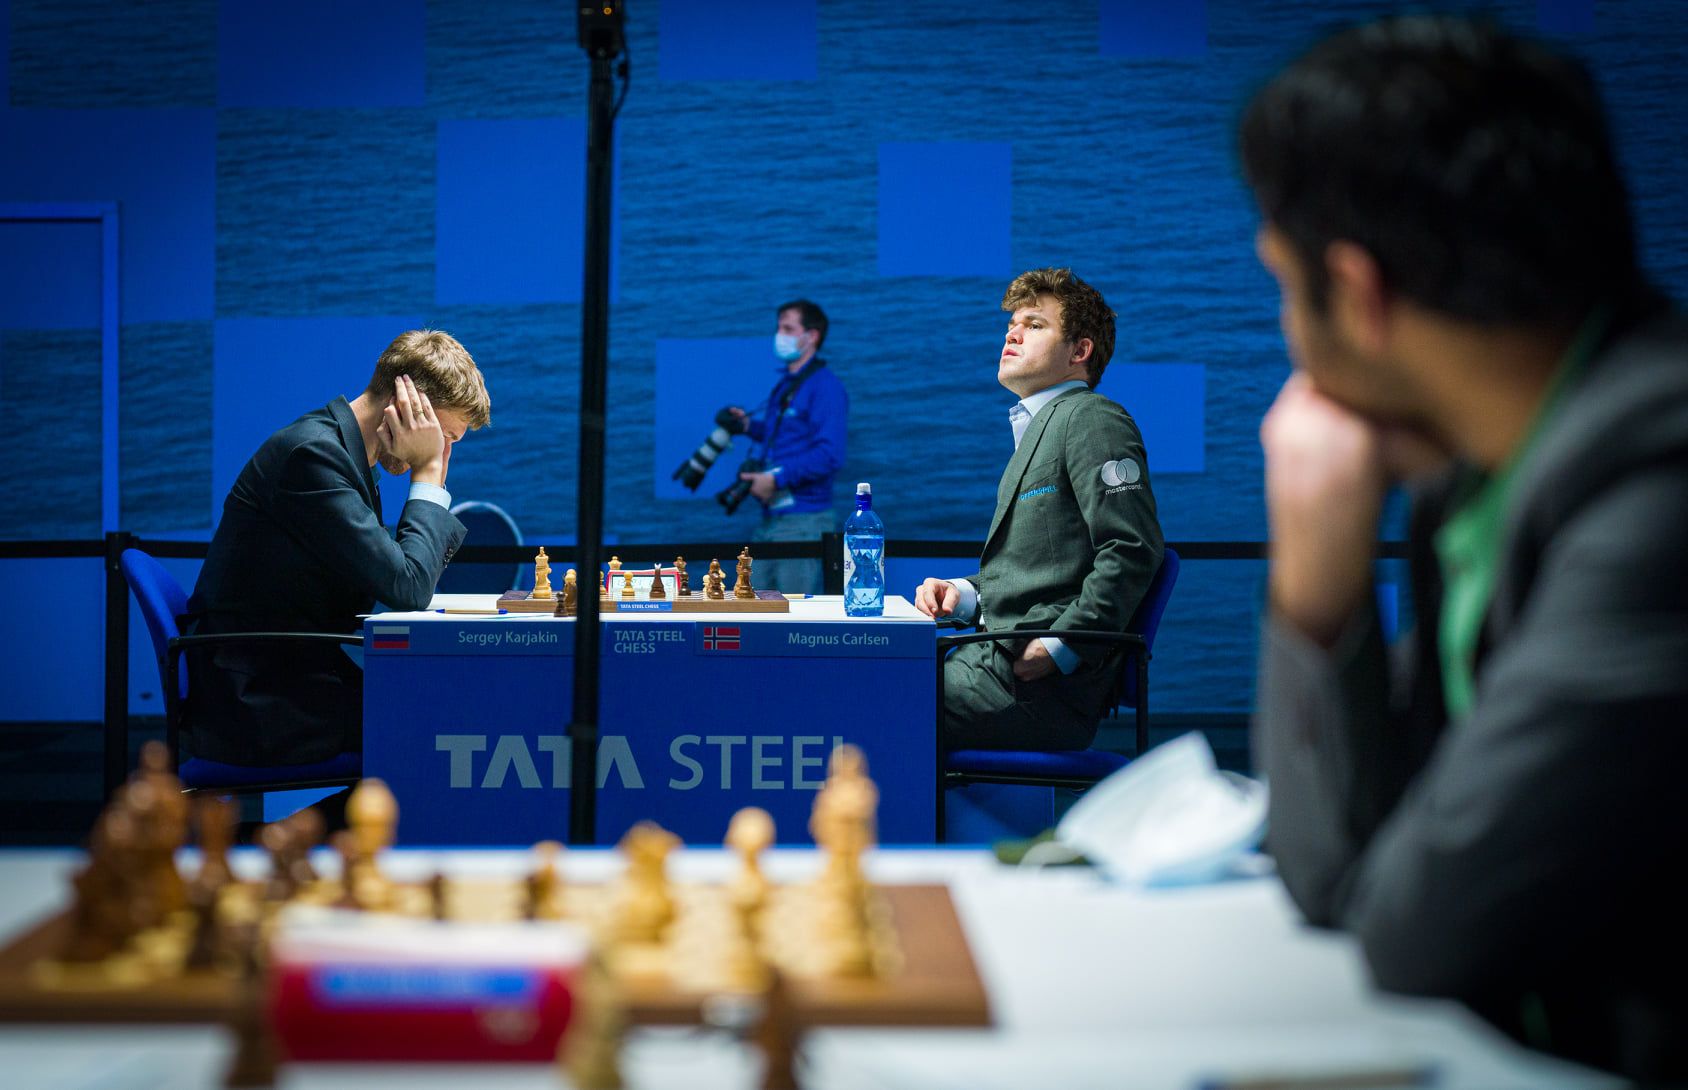 Tata Steel Chess on X: ♟ After playing in the Challengers in